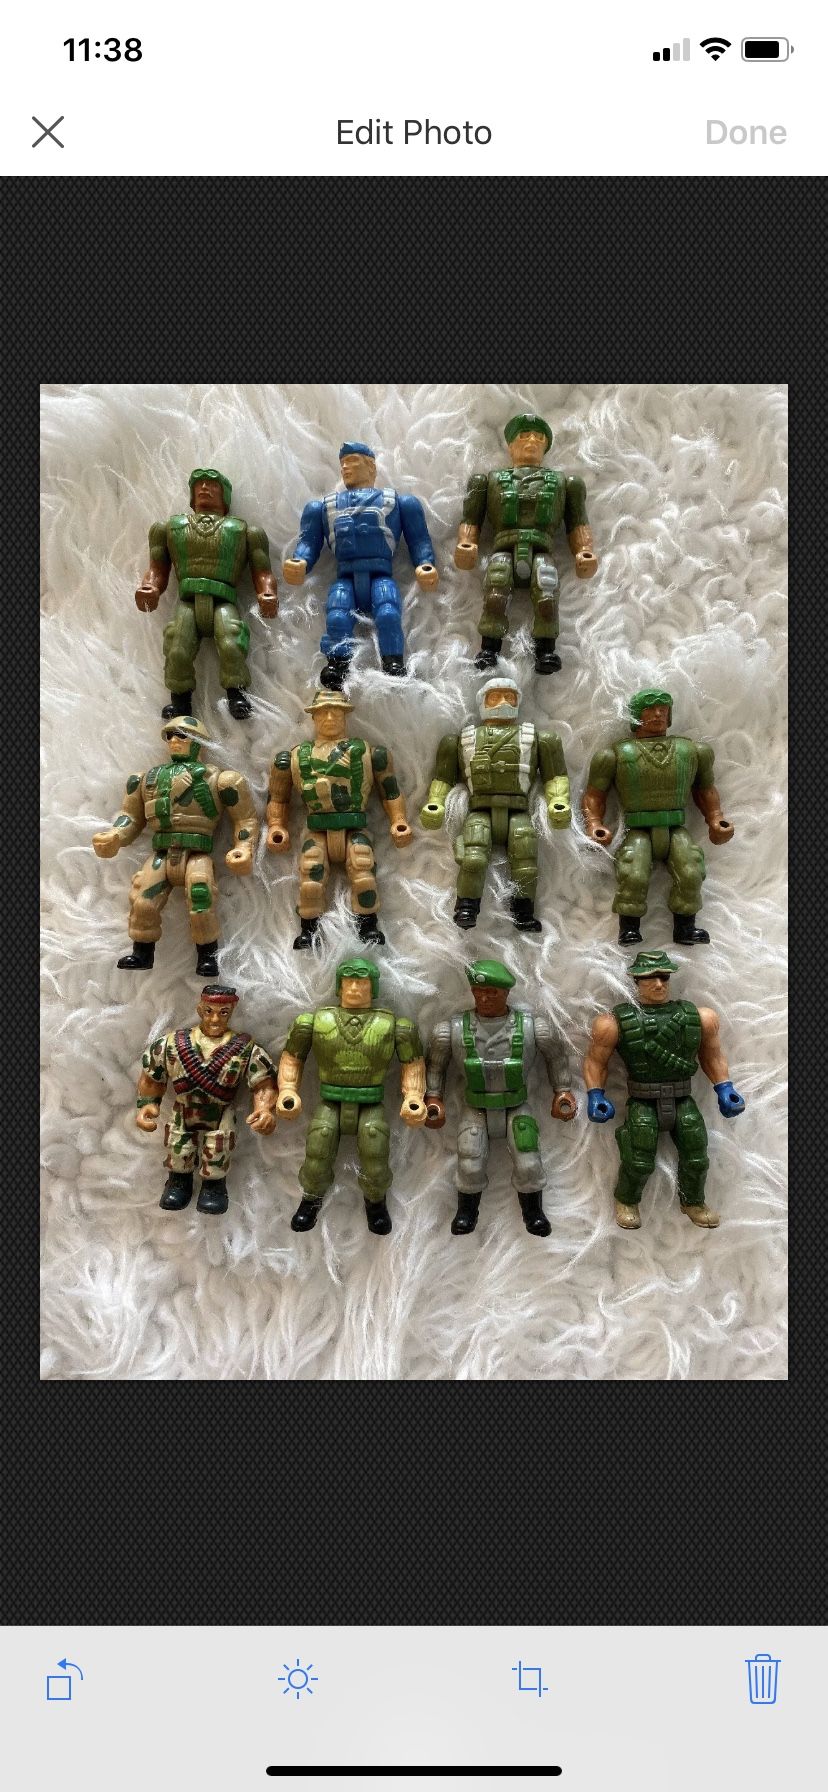 Vintage Small Soldiers Action Figures Approximately 2” Tall